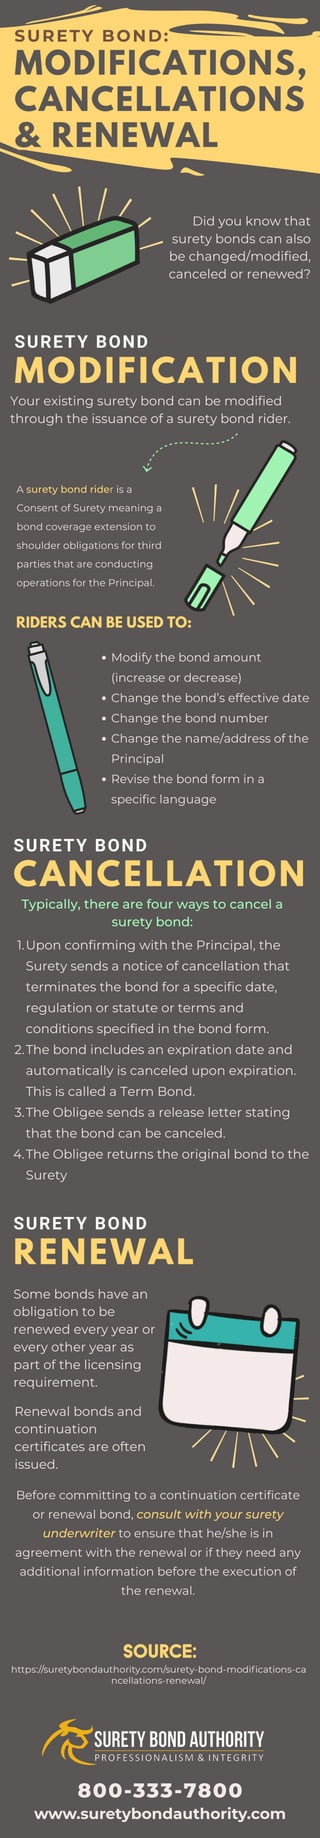 Surety Bond: Modifications, Cancellations and Renewal